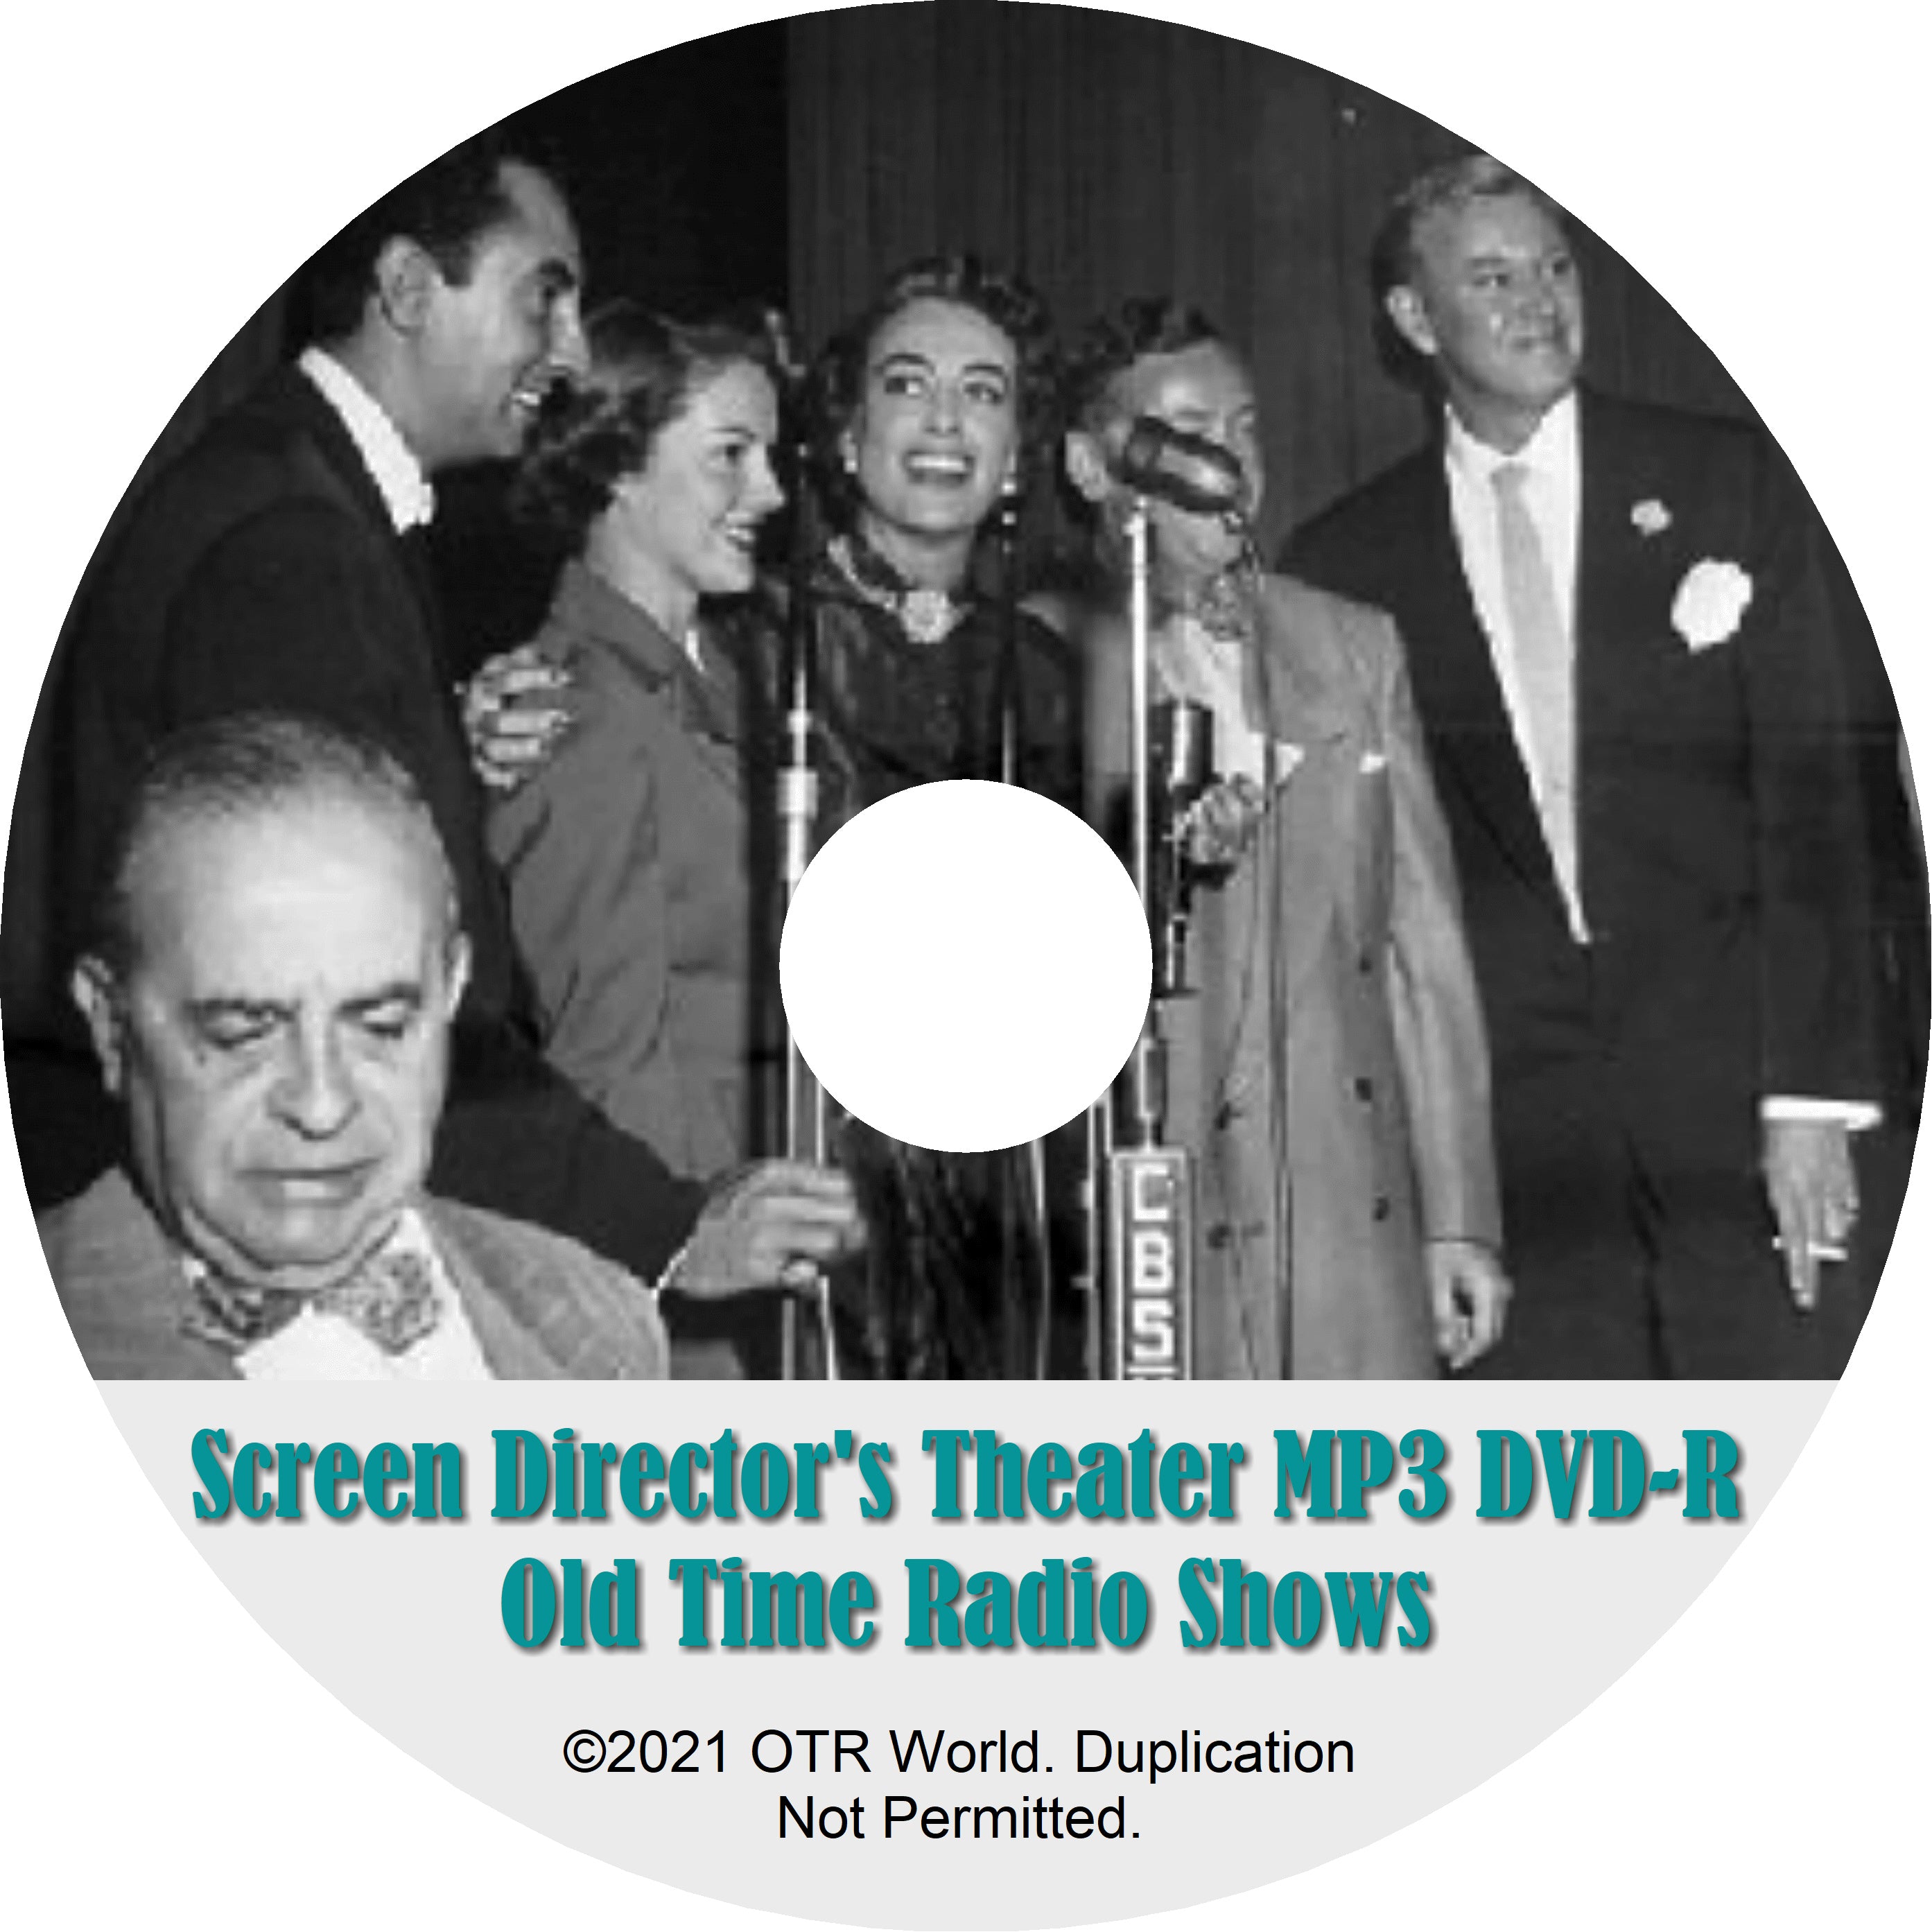 Screen Director's Theater Playhouse OTR Old Time Radio Shows MP3 On DVD-R 104 Episodes